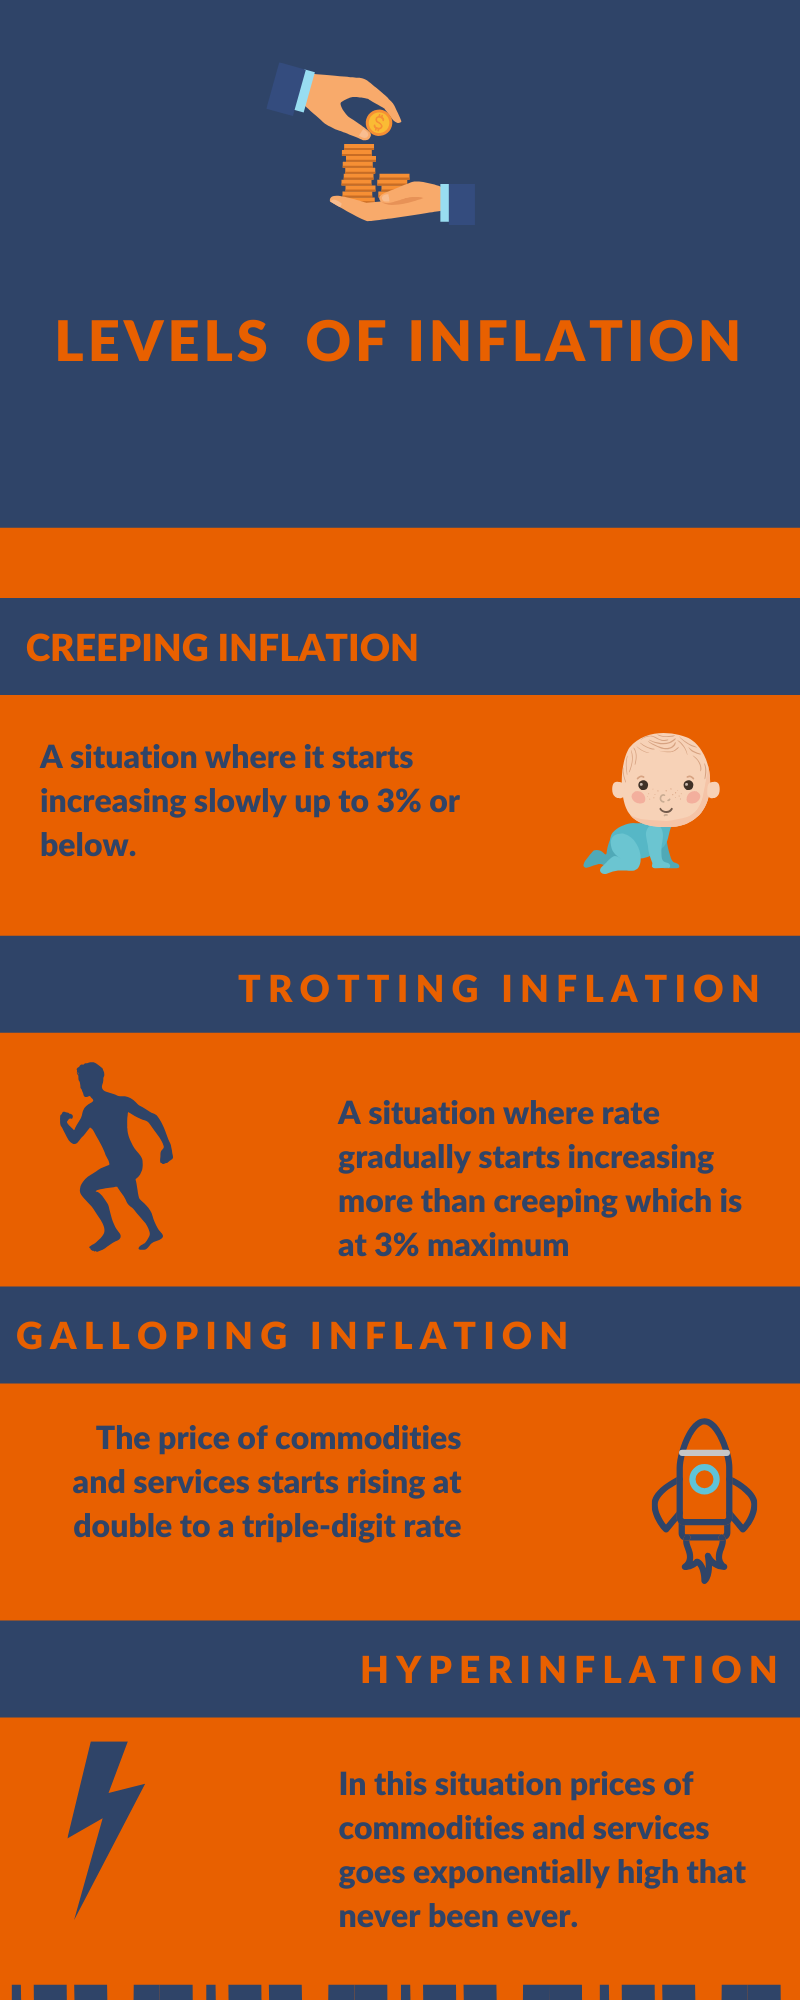 Levels of Inflation infographic image